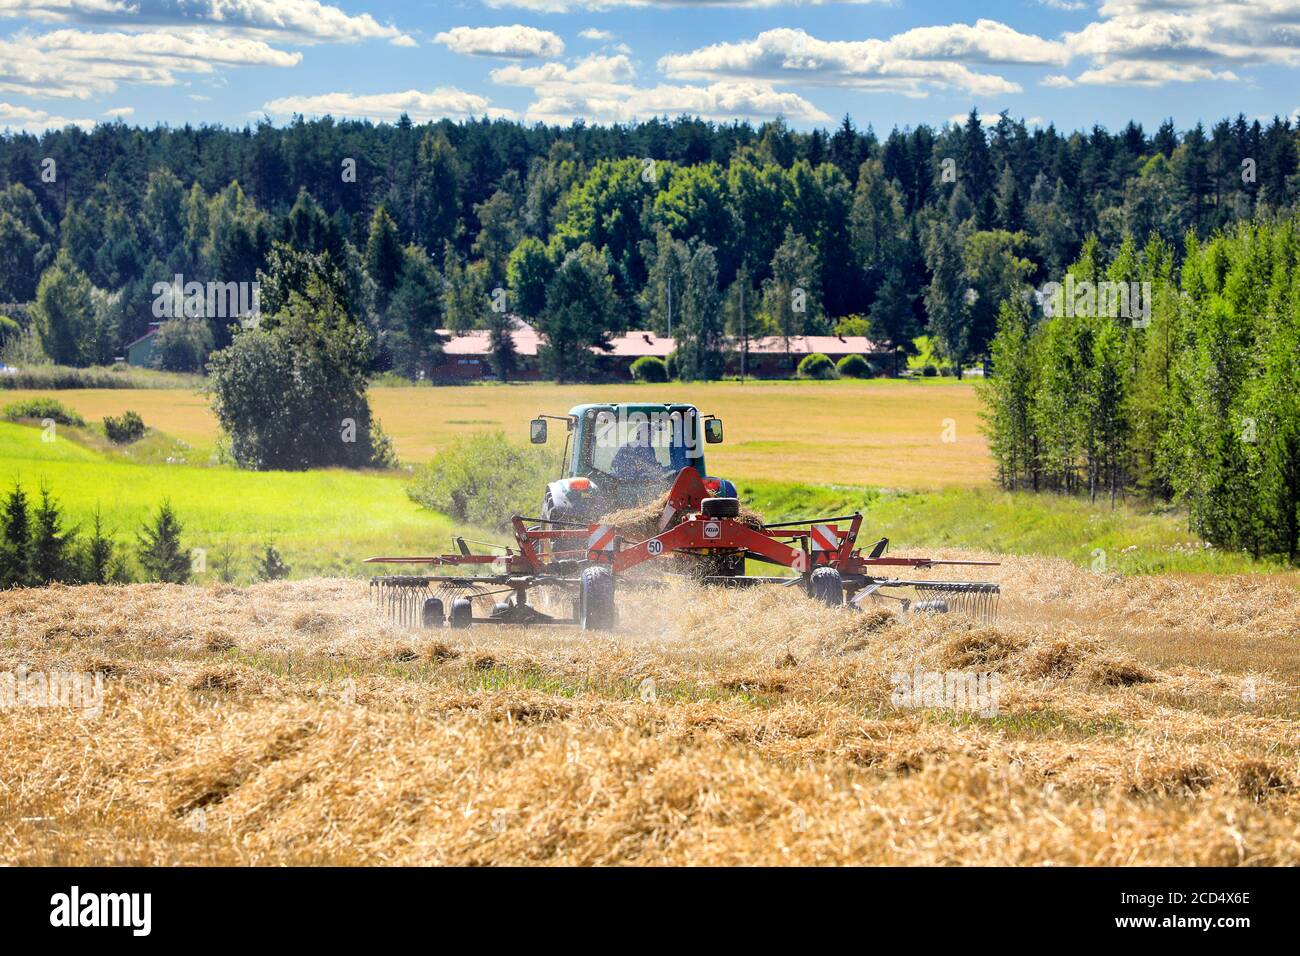 Farmer working in field with John Deere 6420S tractor and Fella rotary rake, raking dry straw on day of late summer. Salo, Finland. August 16, 2020. Stock Photo